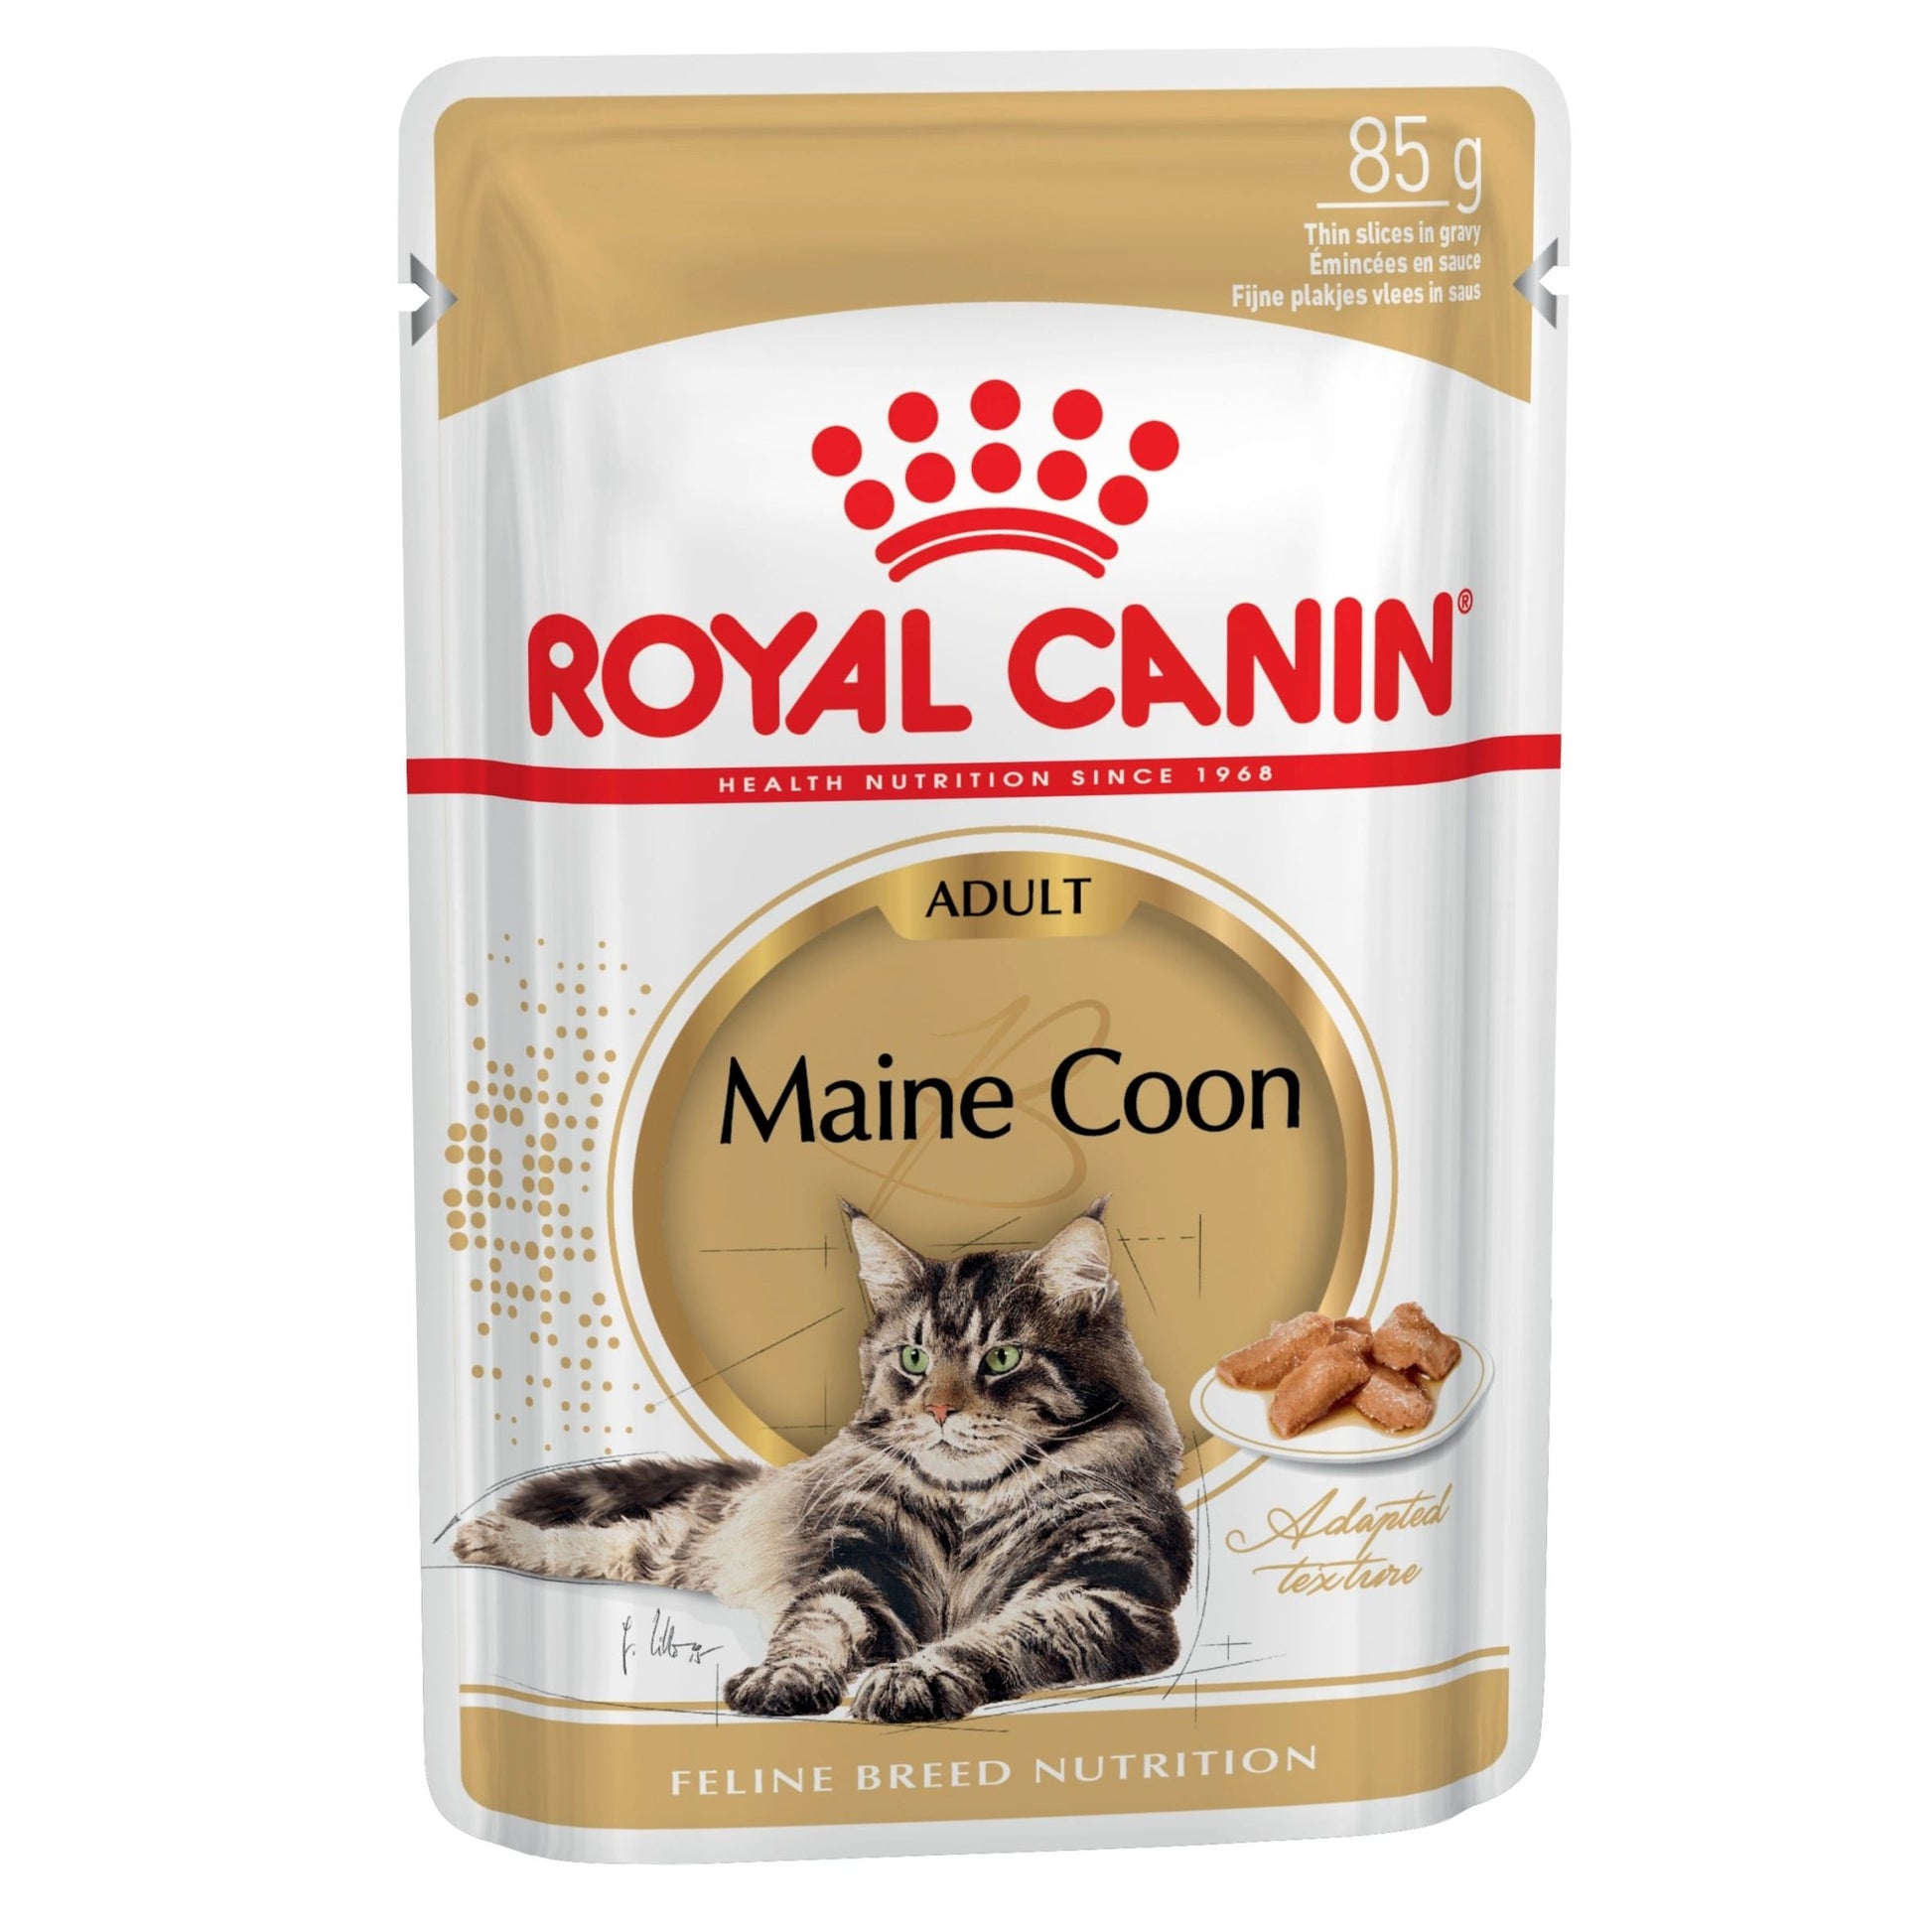 Royal Canin Cat Wet Food Pouches Maine Coon 12x85g - Woonona Petfood & Produce